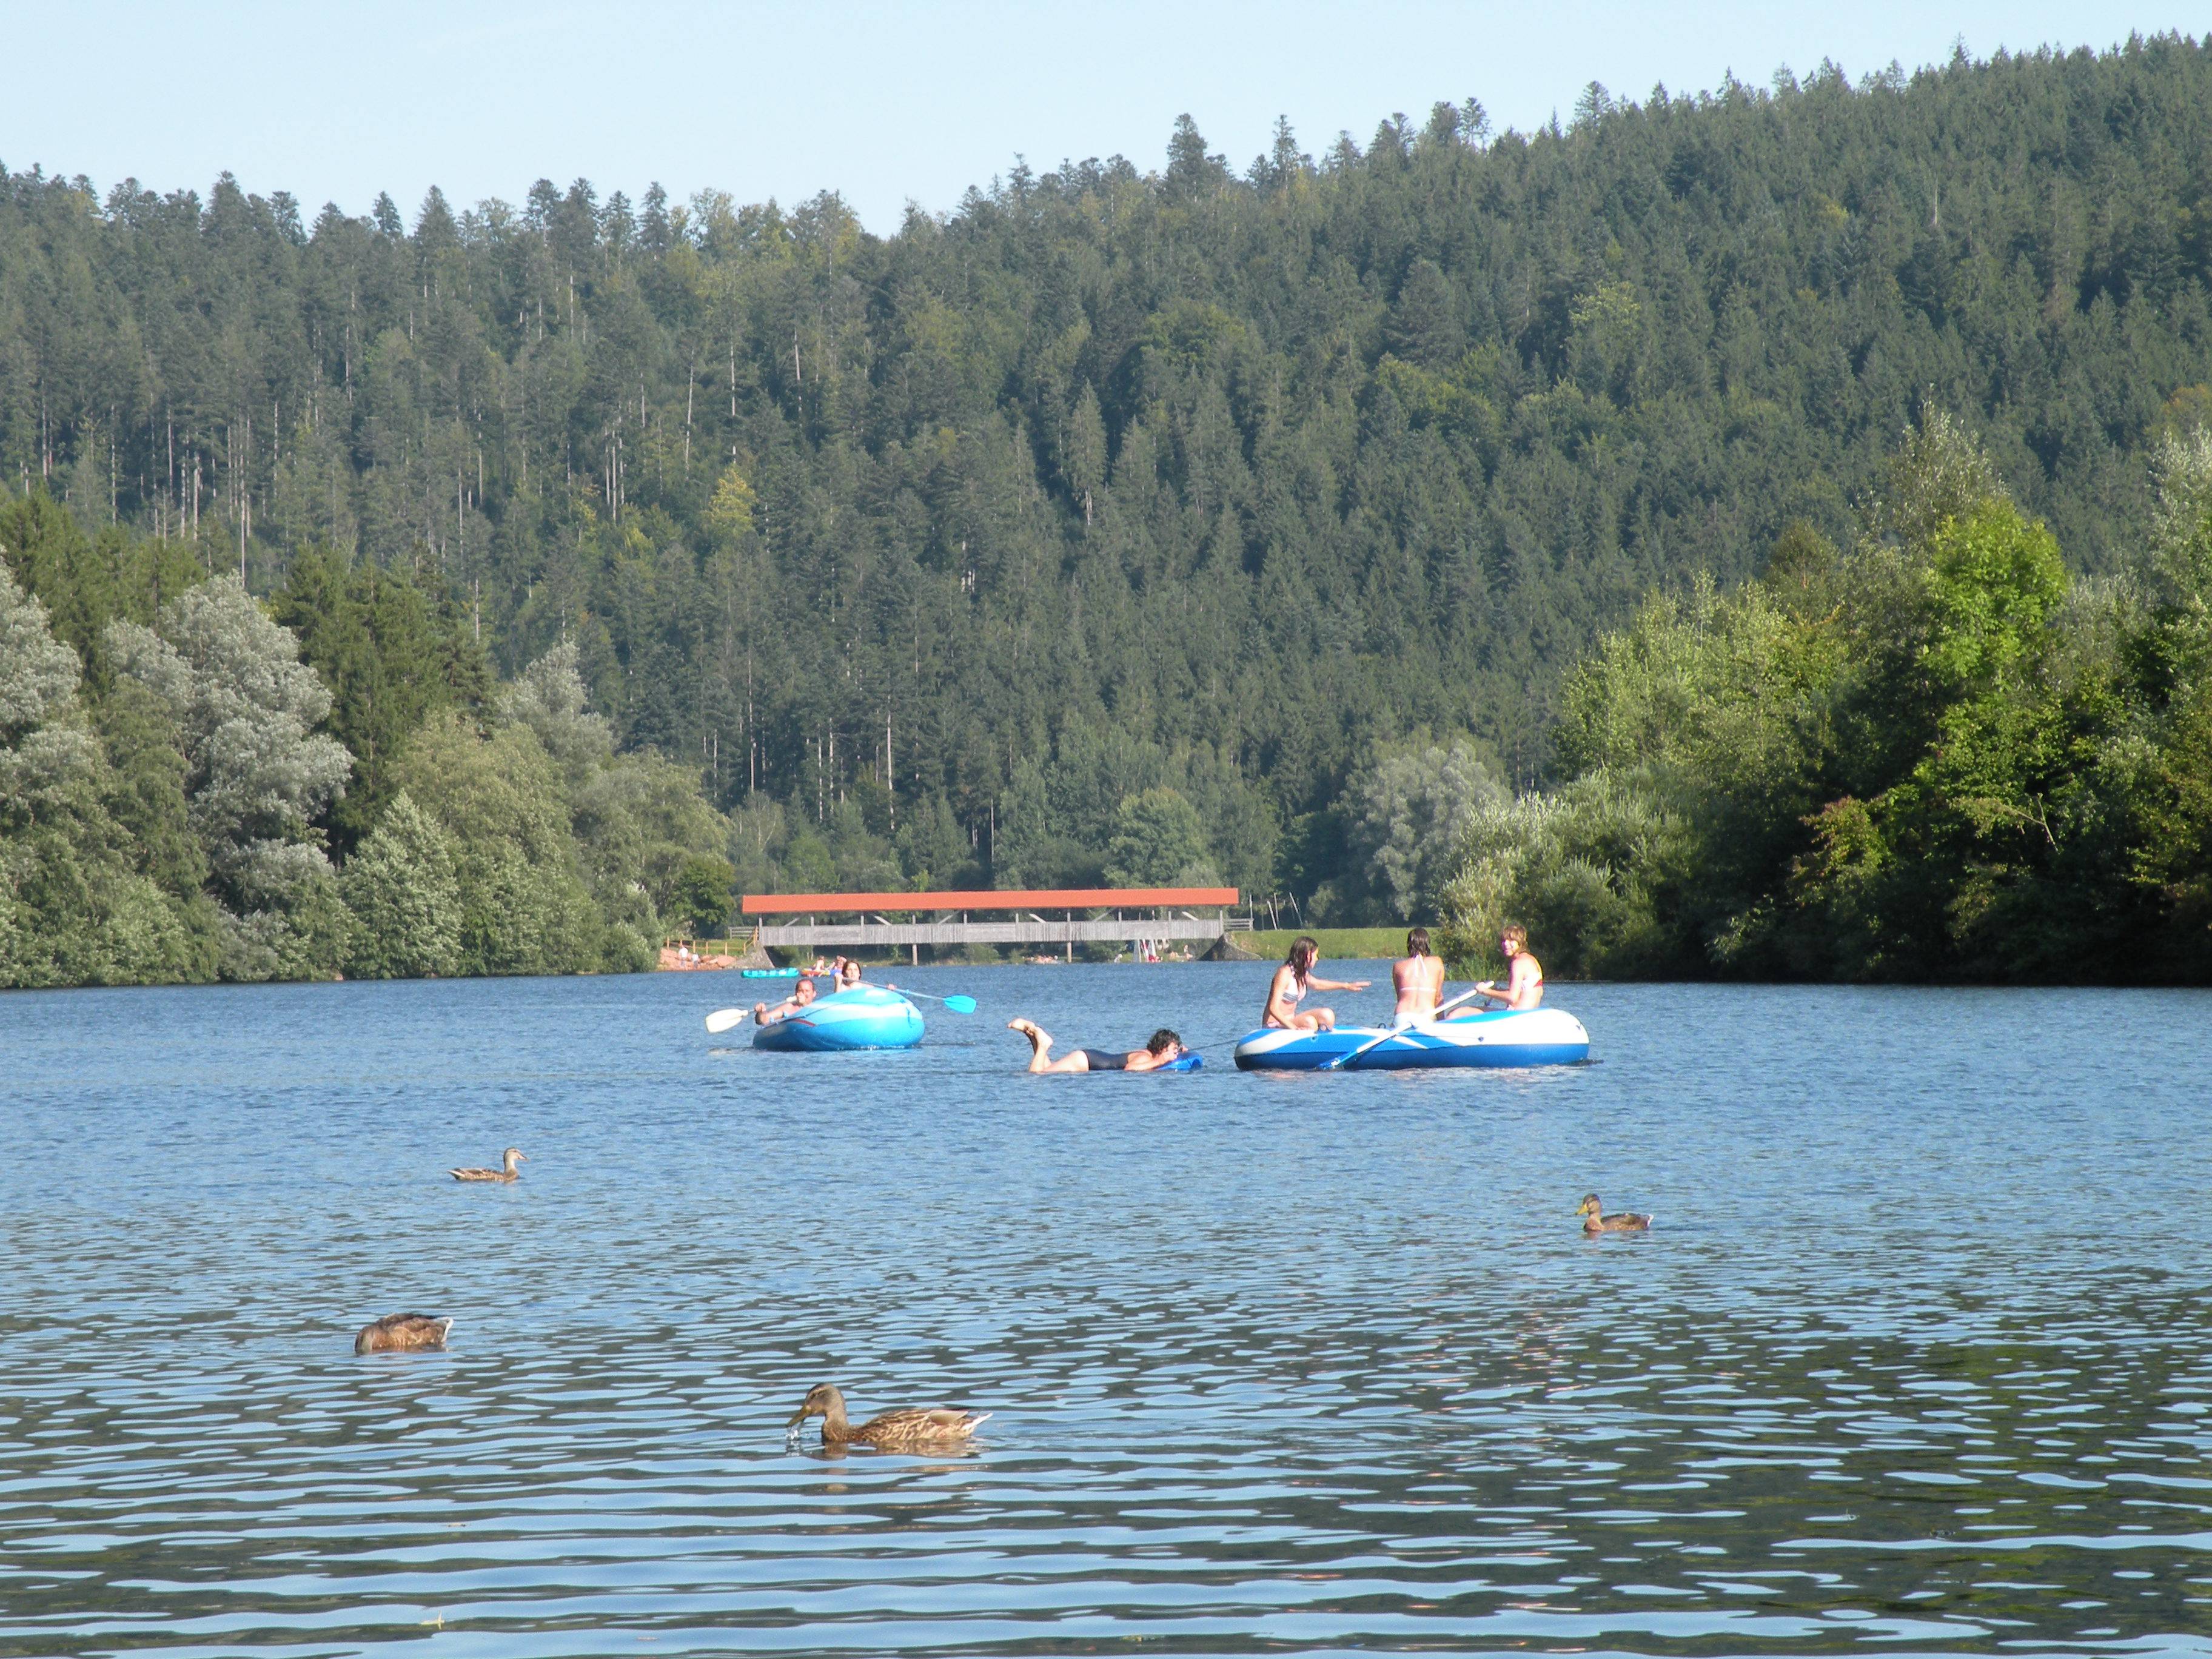 Surfing, sailing, swimming: For cool refreshment - Hotel Grüner Wald